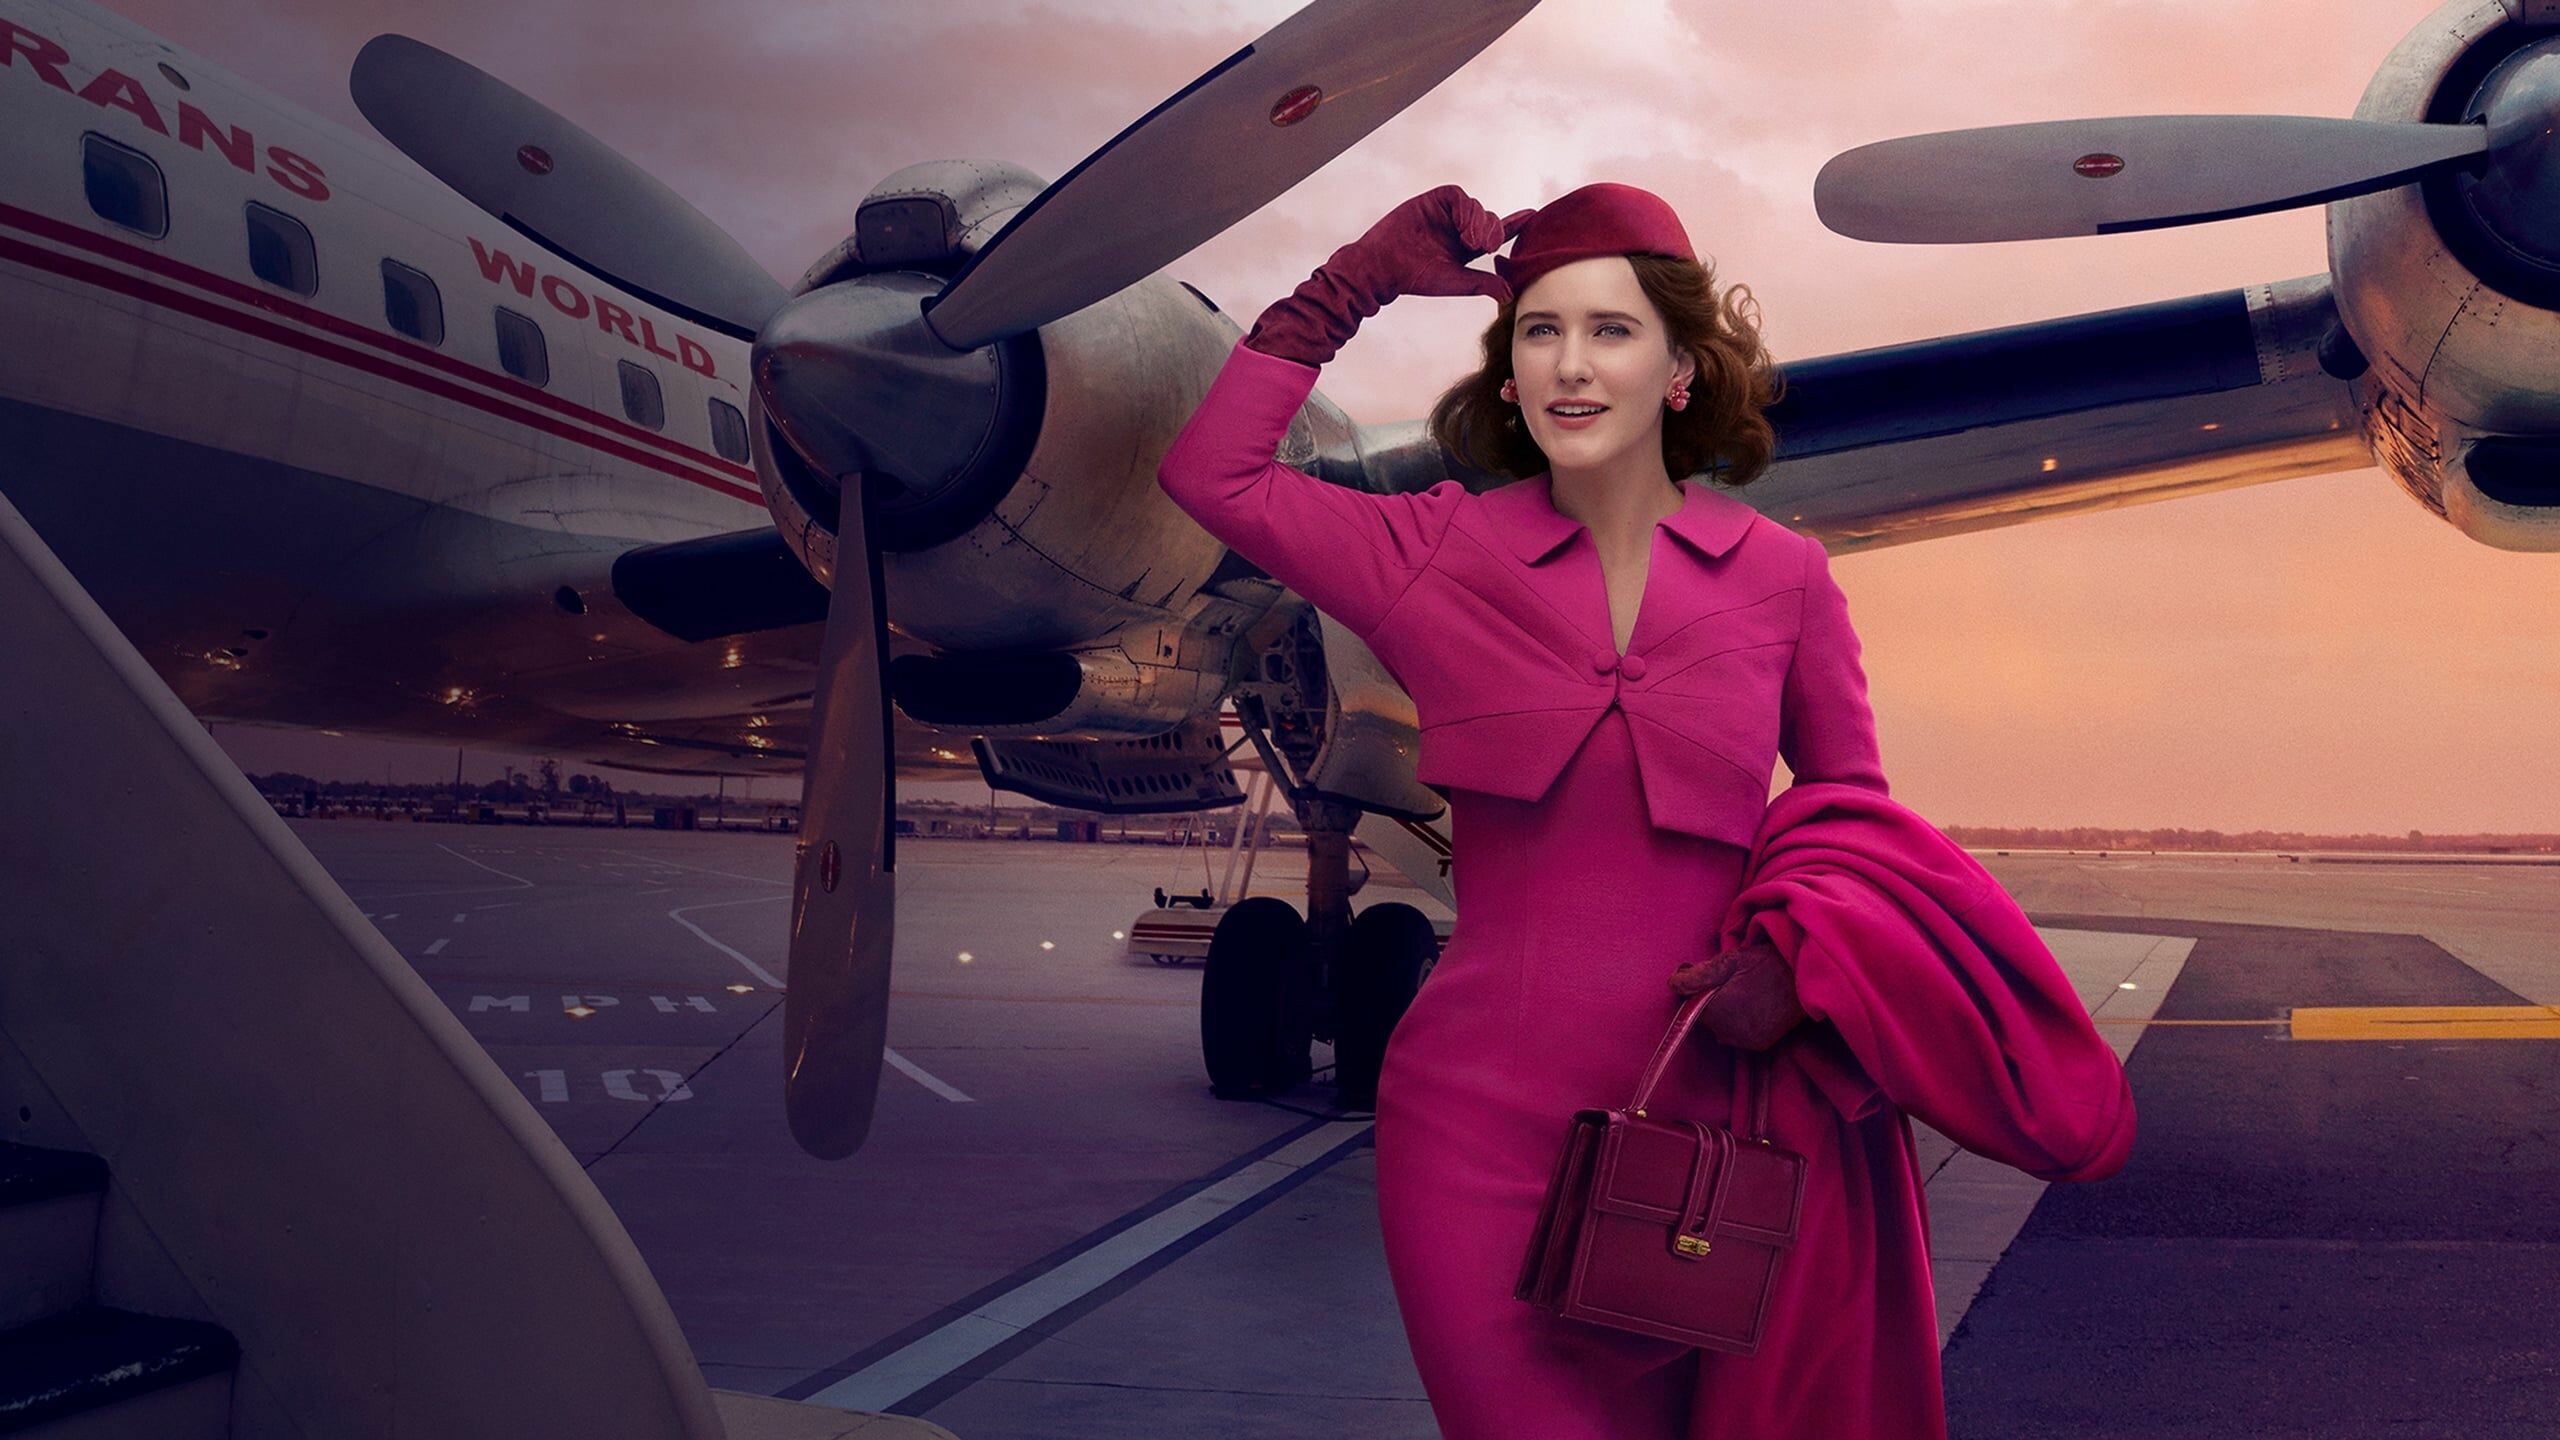 The Marvelous Mrs. Maisel: Miriam "Midge" Maisel, a New York housewife who discovers she has a knack for stand-up comedy. 2560x1440 HD Wallpaper.